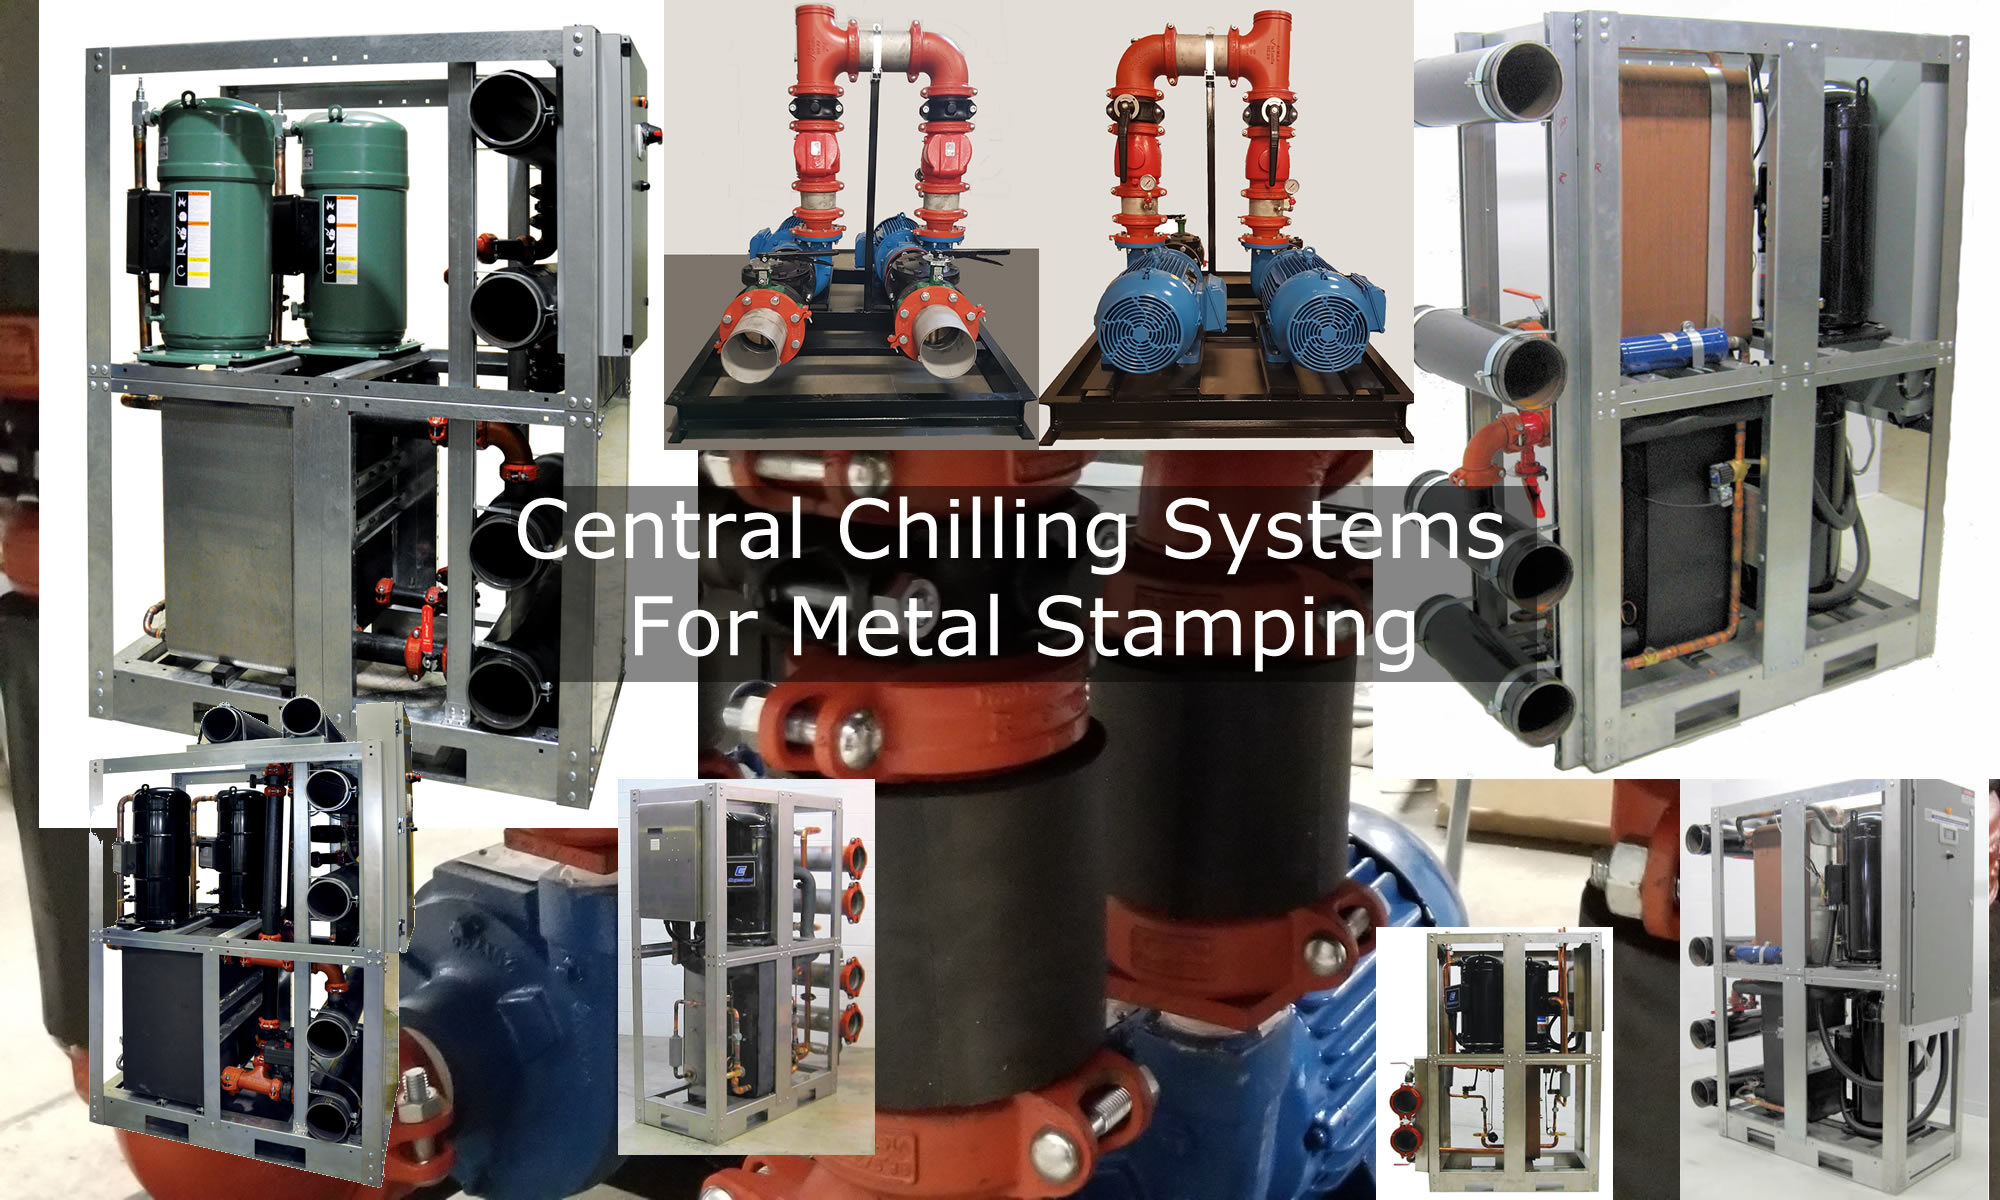 Central Chilling Systems For Metal Stamping